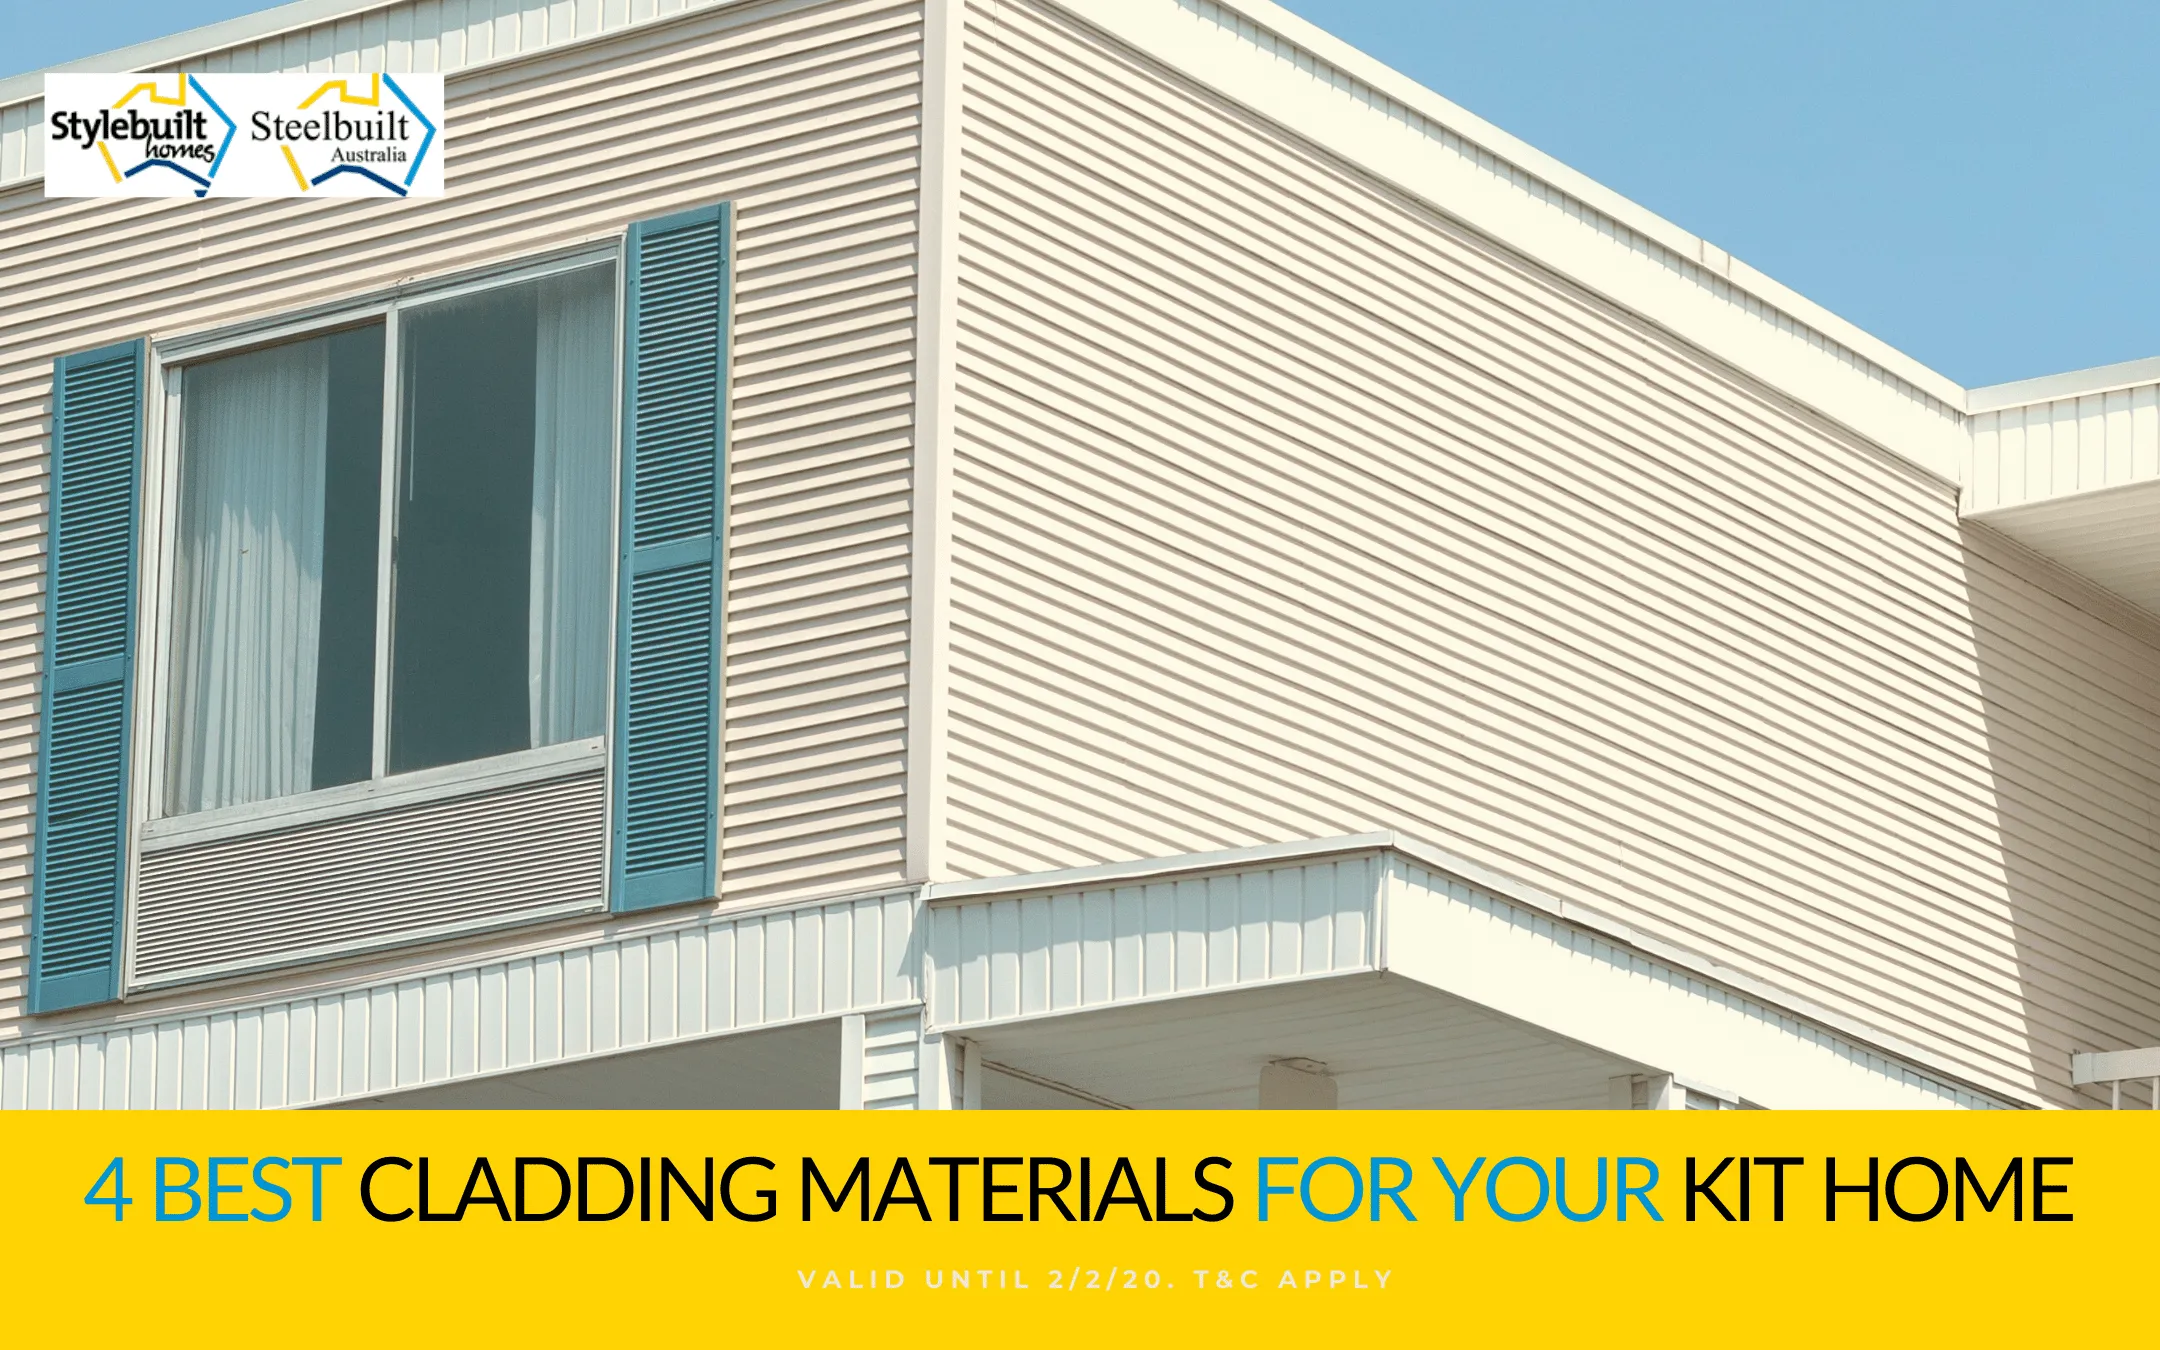 4 Best Cladding Materials for Your Kit Home